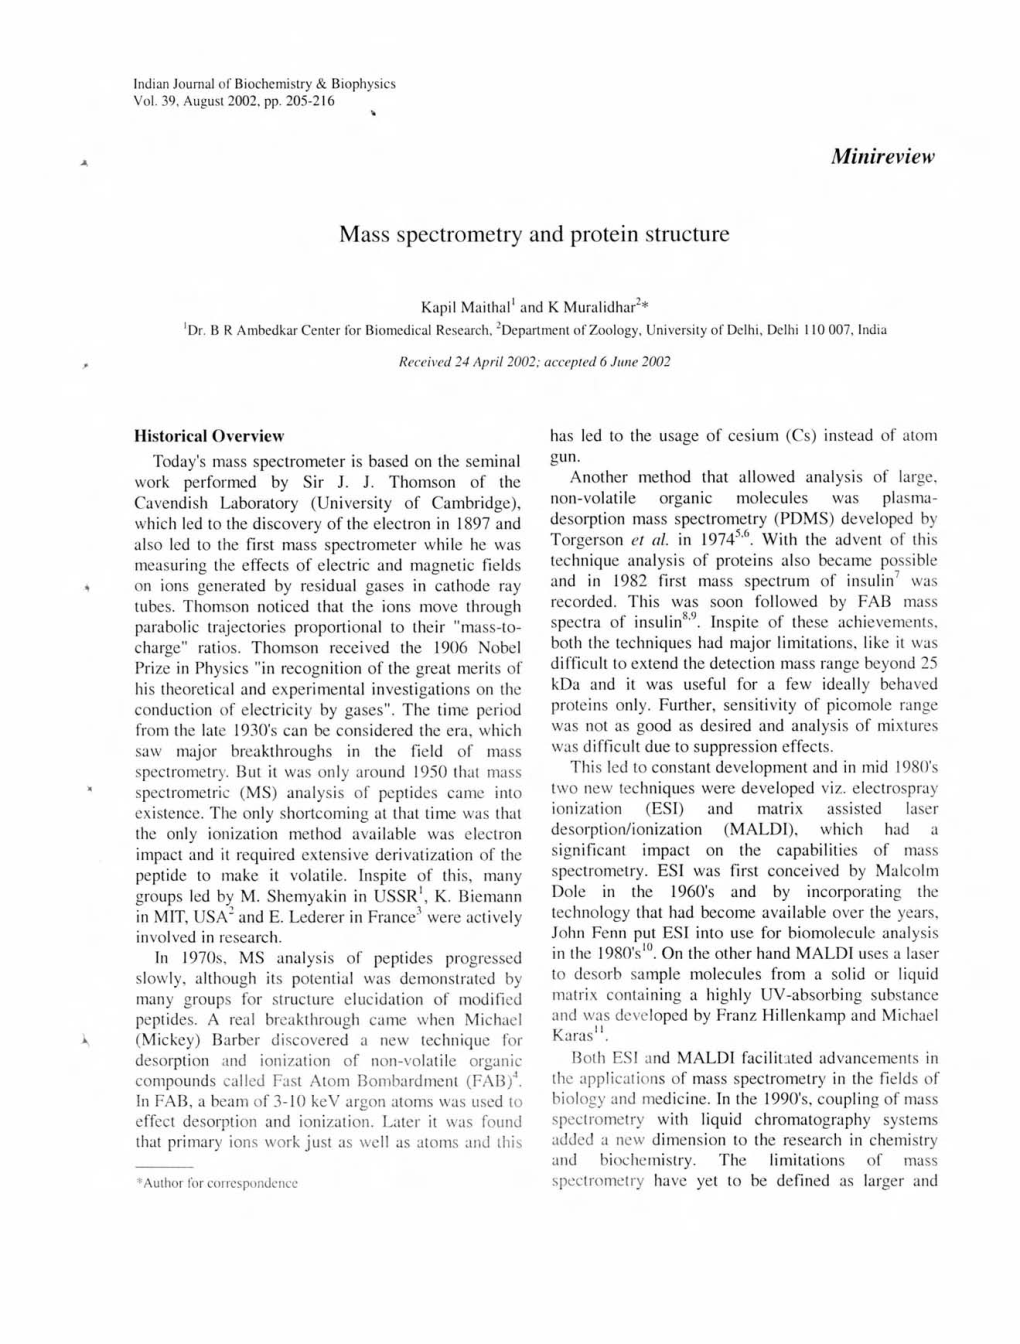 Mass Spectrometry and Protein Structure